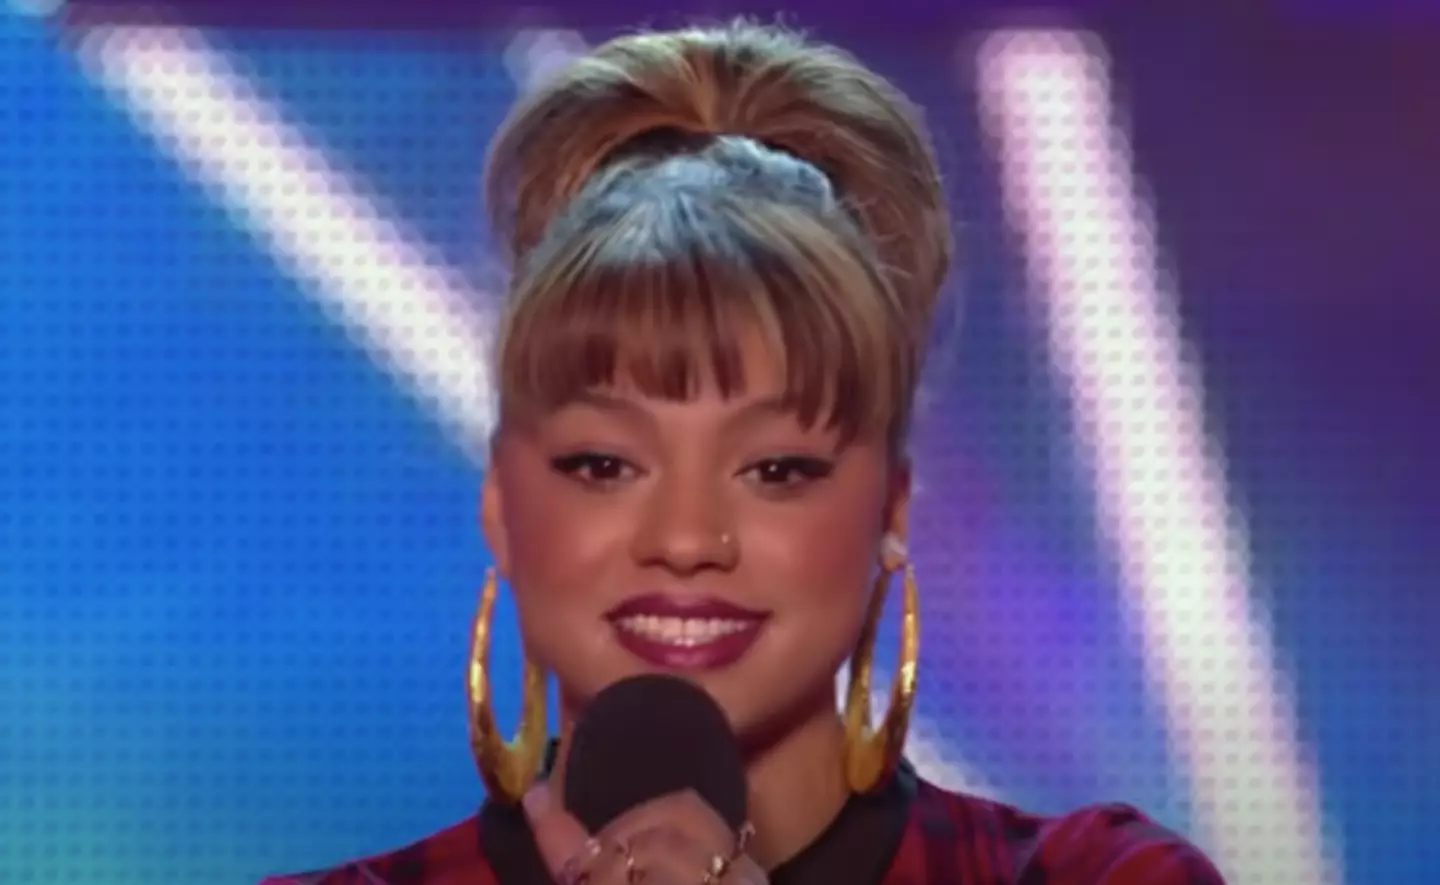 Alexis appeared on BGT (